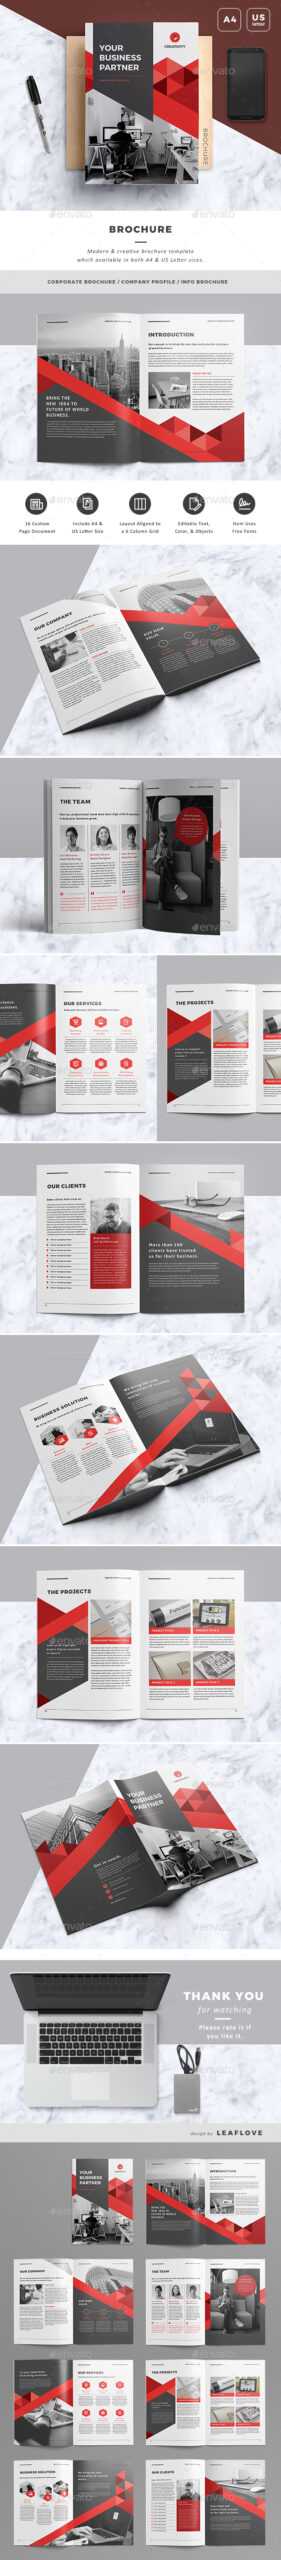 Indesign Brochure Templates From Graphicriver Inside Brochure Template Indesign Free Download